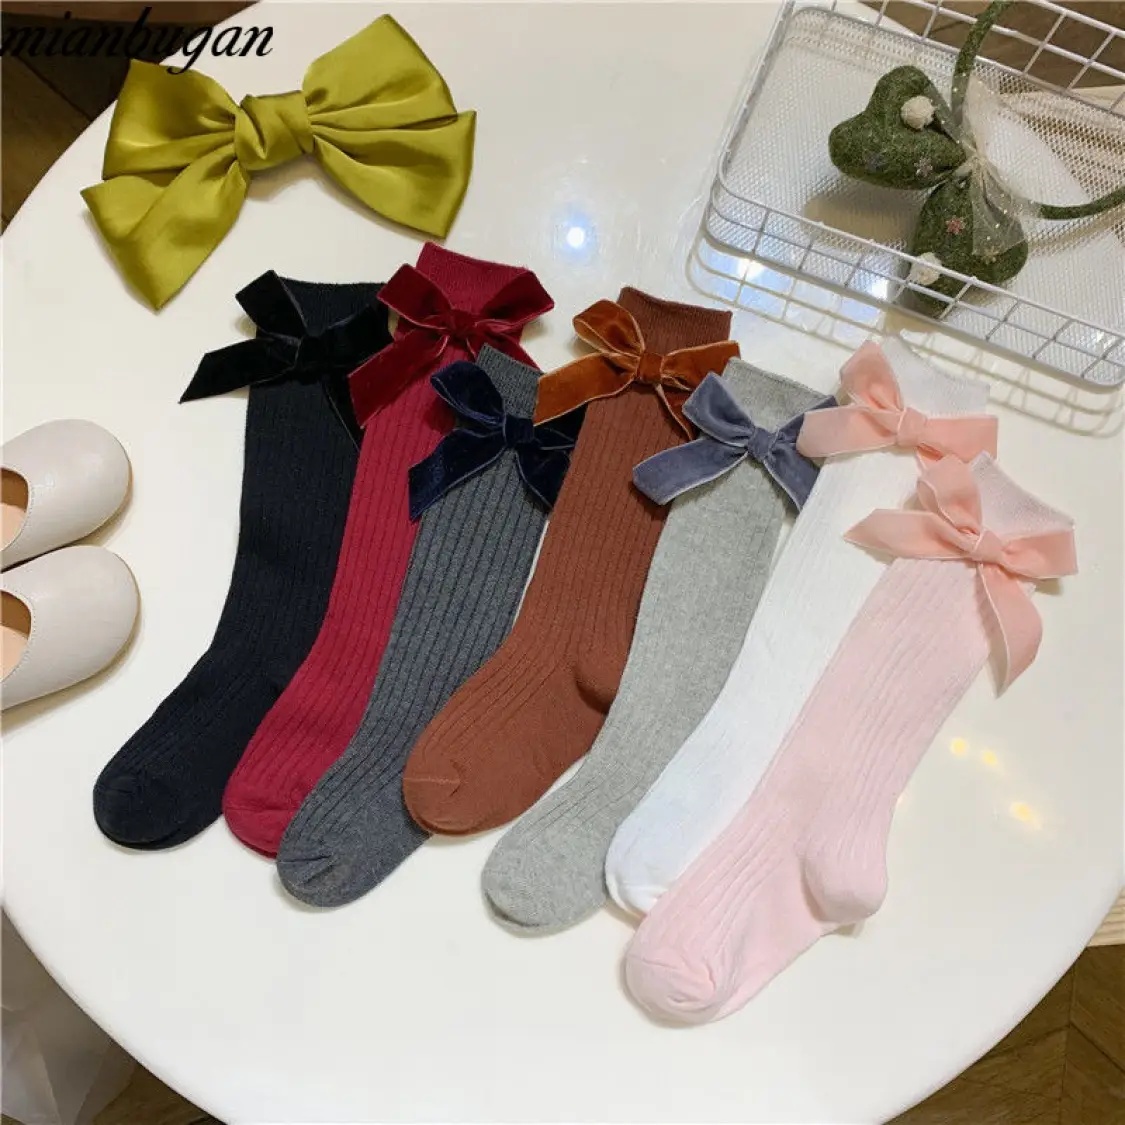 Comfortable and personalized baby socks. Welcome to your sample selection and customization